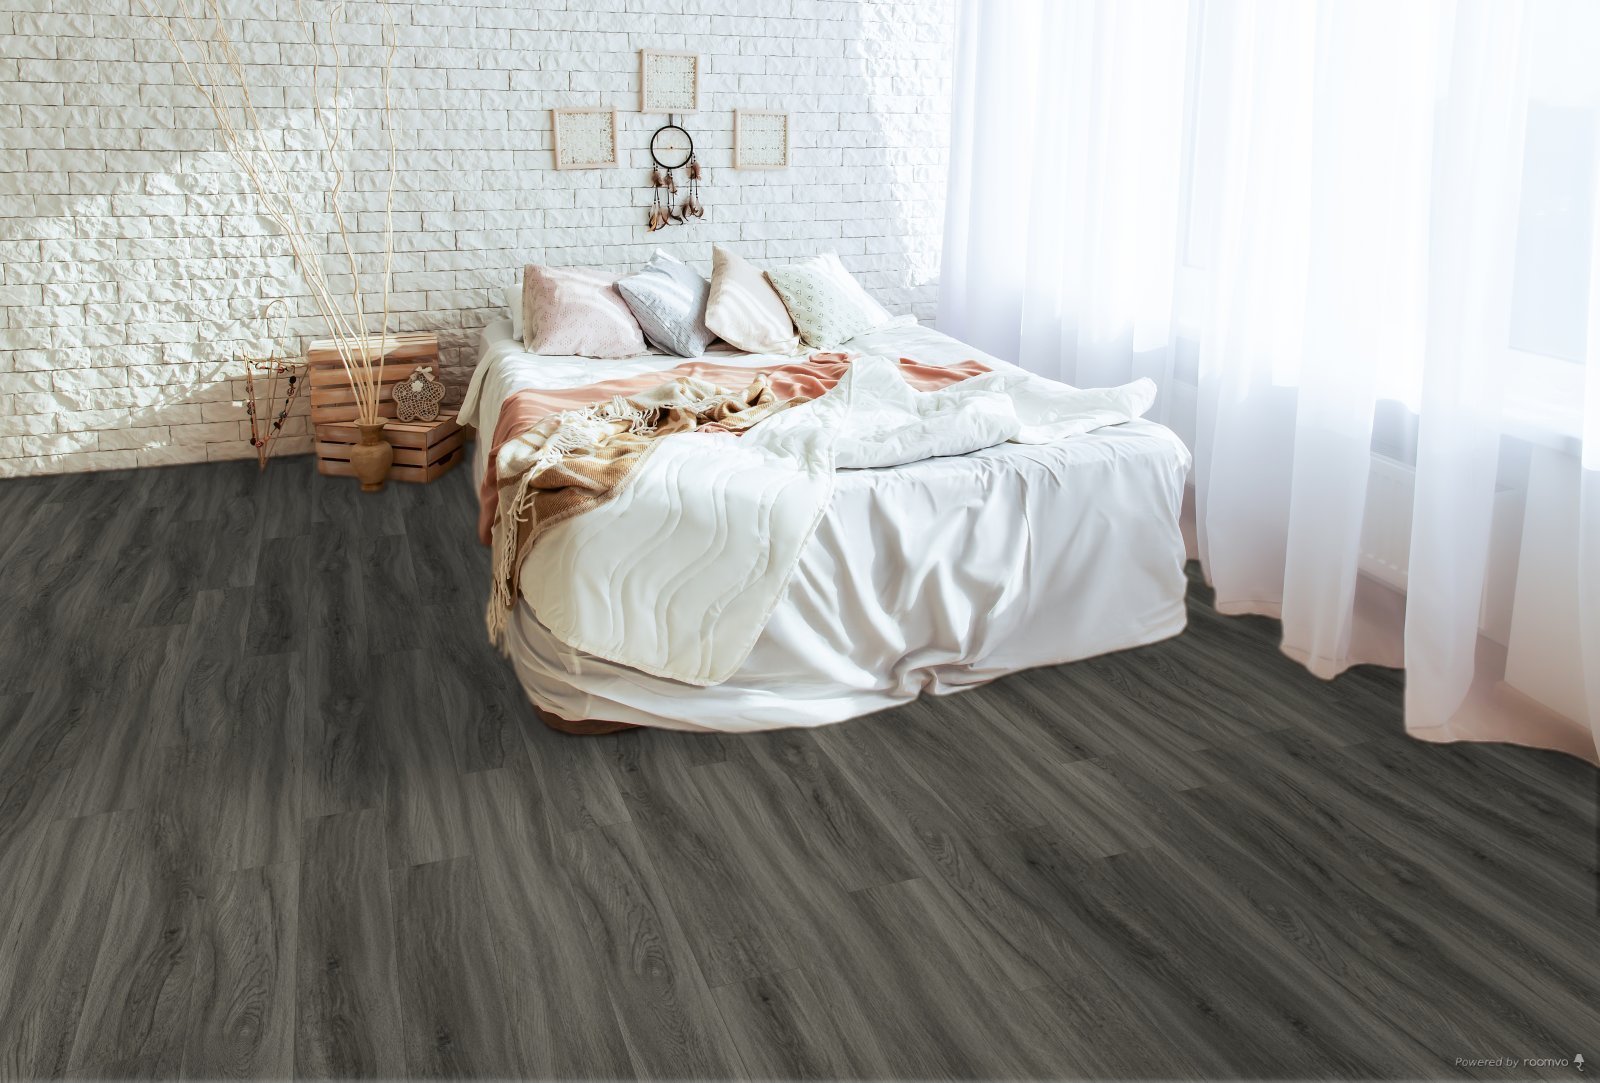 Horizen Flooring presents to you a picture of a quality wide plank Cambridge luxury vinyl plank. NovoCore Premium EIR collection features a wide range of colors & designs that will compliment any interior. Natural wood grain synchronized surface allow for an authentic hardwood look & feel. This collection features a 0.25″ / 6.5 mm overall thickness and a durable 22 mil / 0.55 mm wear layer for residential and commercial applications.